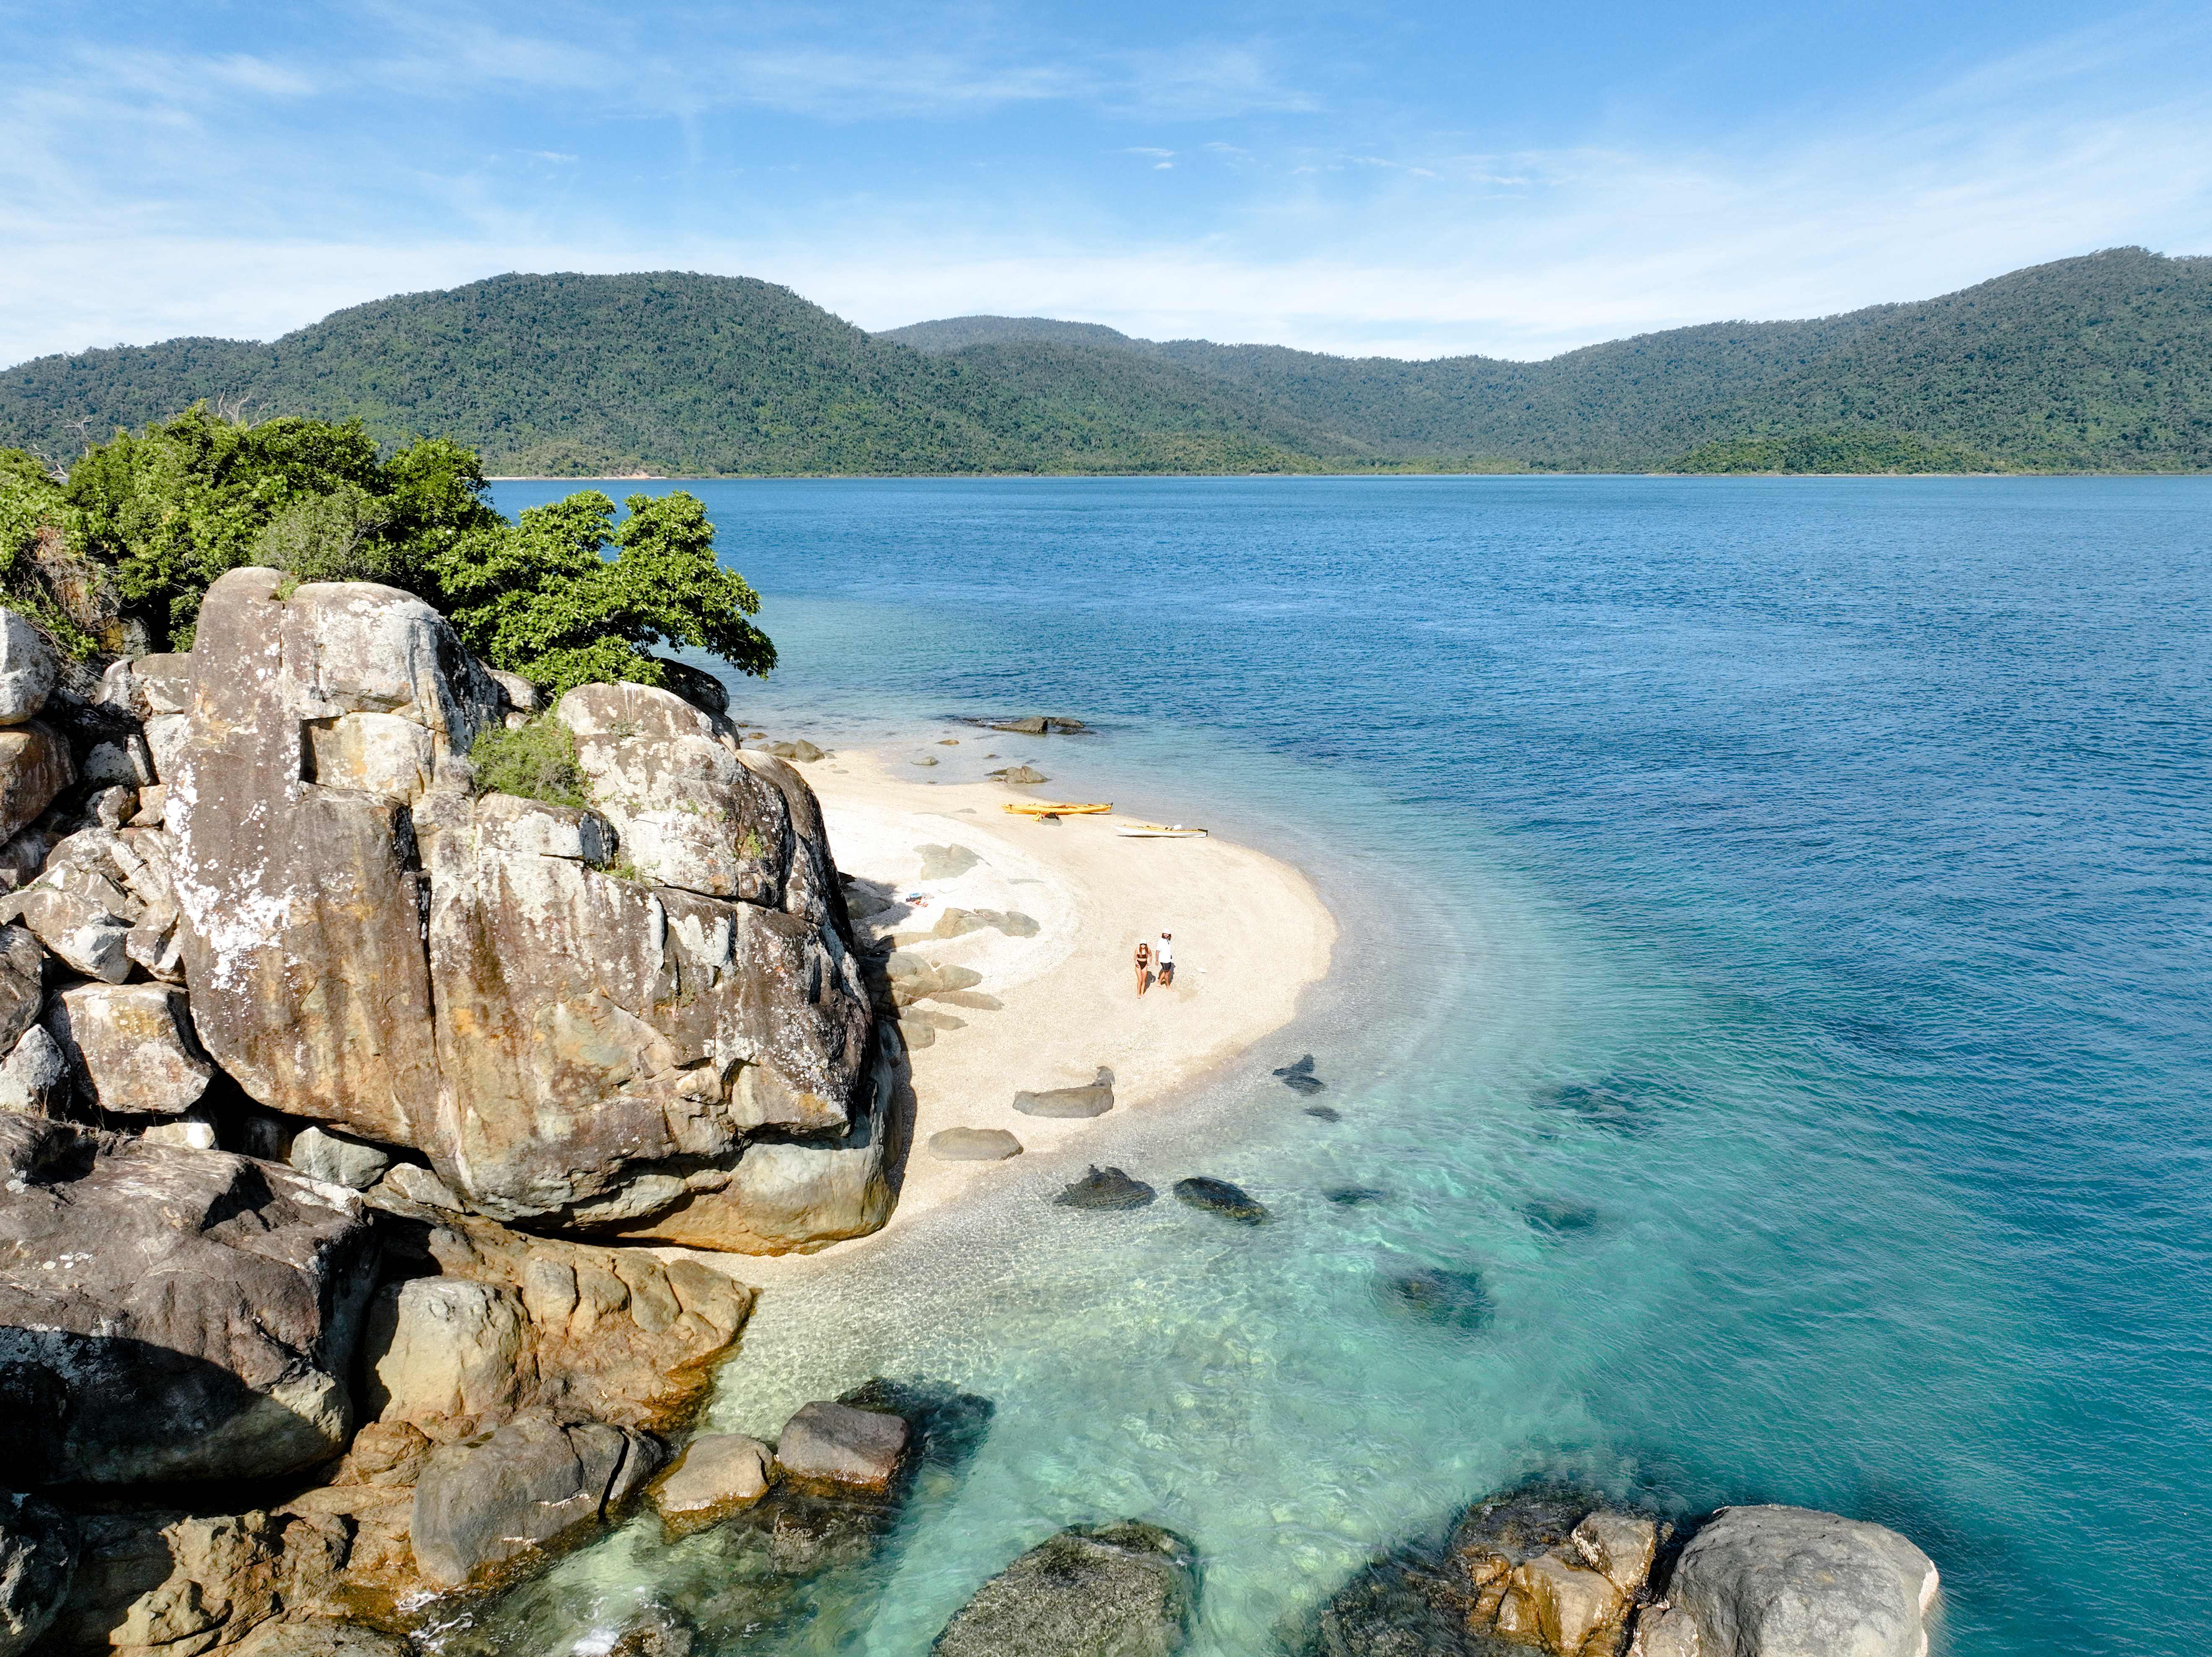 This Secret And Stunning Island Destination Is Only 30 Minutes